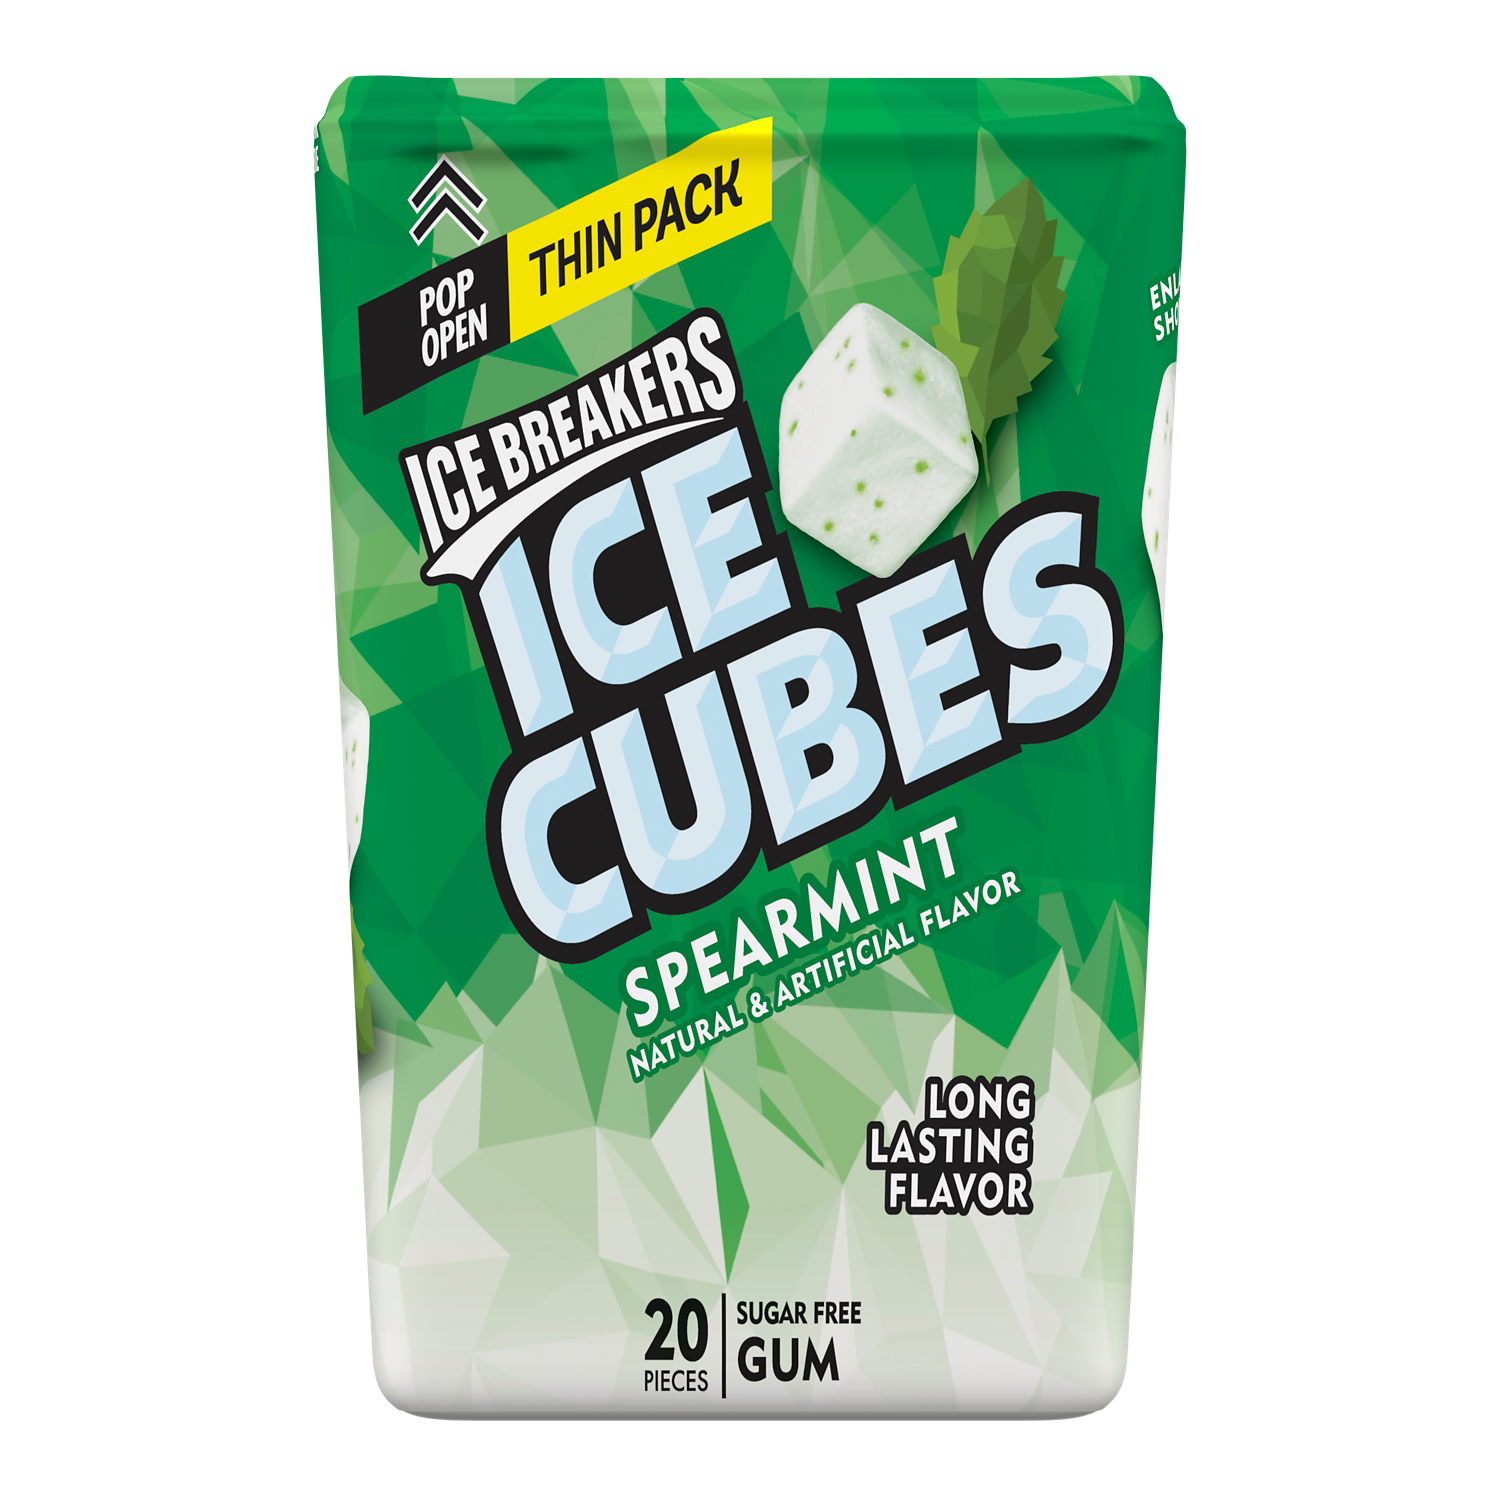 ICE BREAKERS ICE CUBES Spearmint Sugar Free Gum, 1.62 oz thin pack, 20 pieces - Front of Package